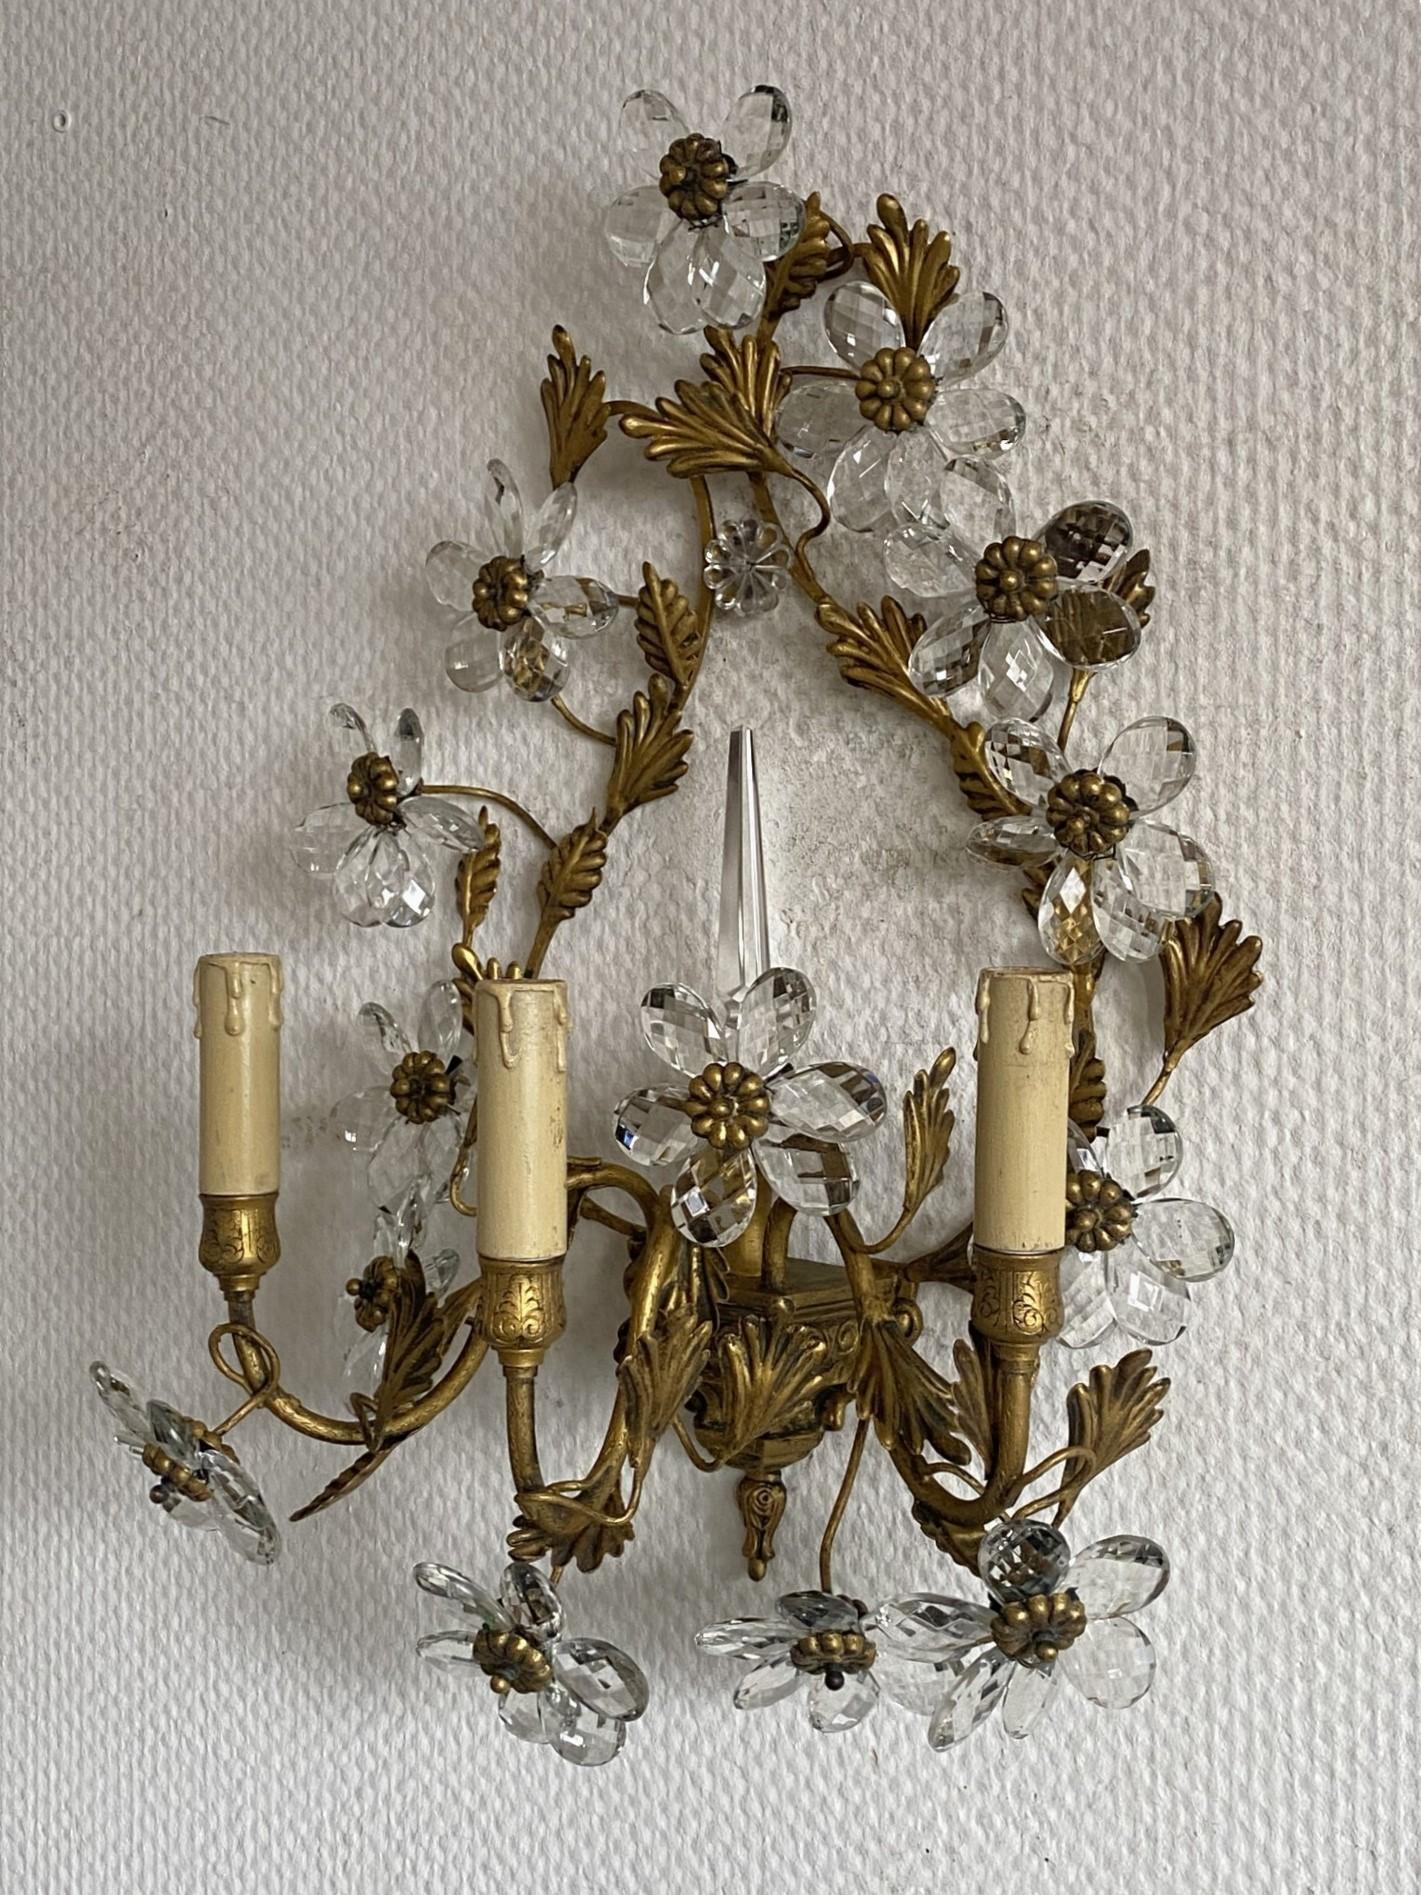 Gilt Pair of Large Maison Baguès Wrought Iron Crystal Flower Wall Sconces, 1930s For Sale